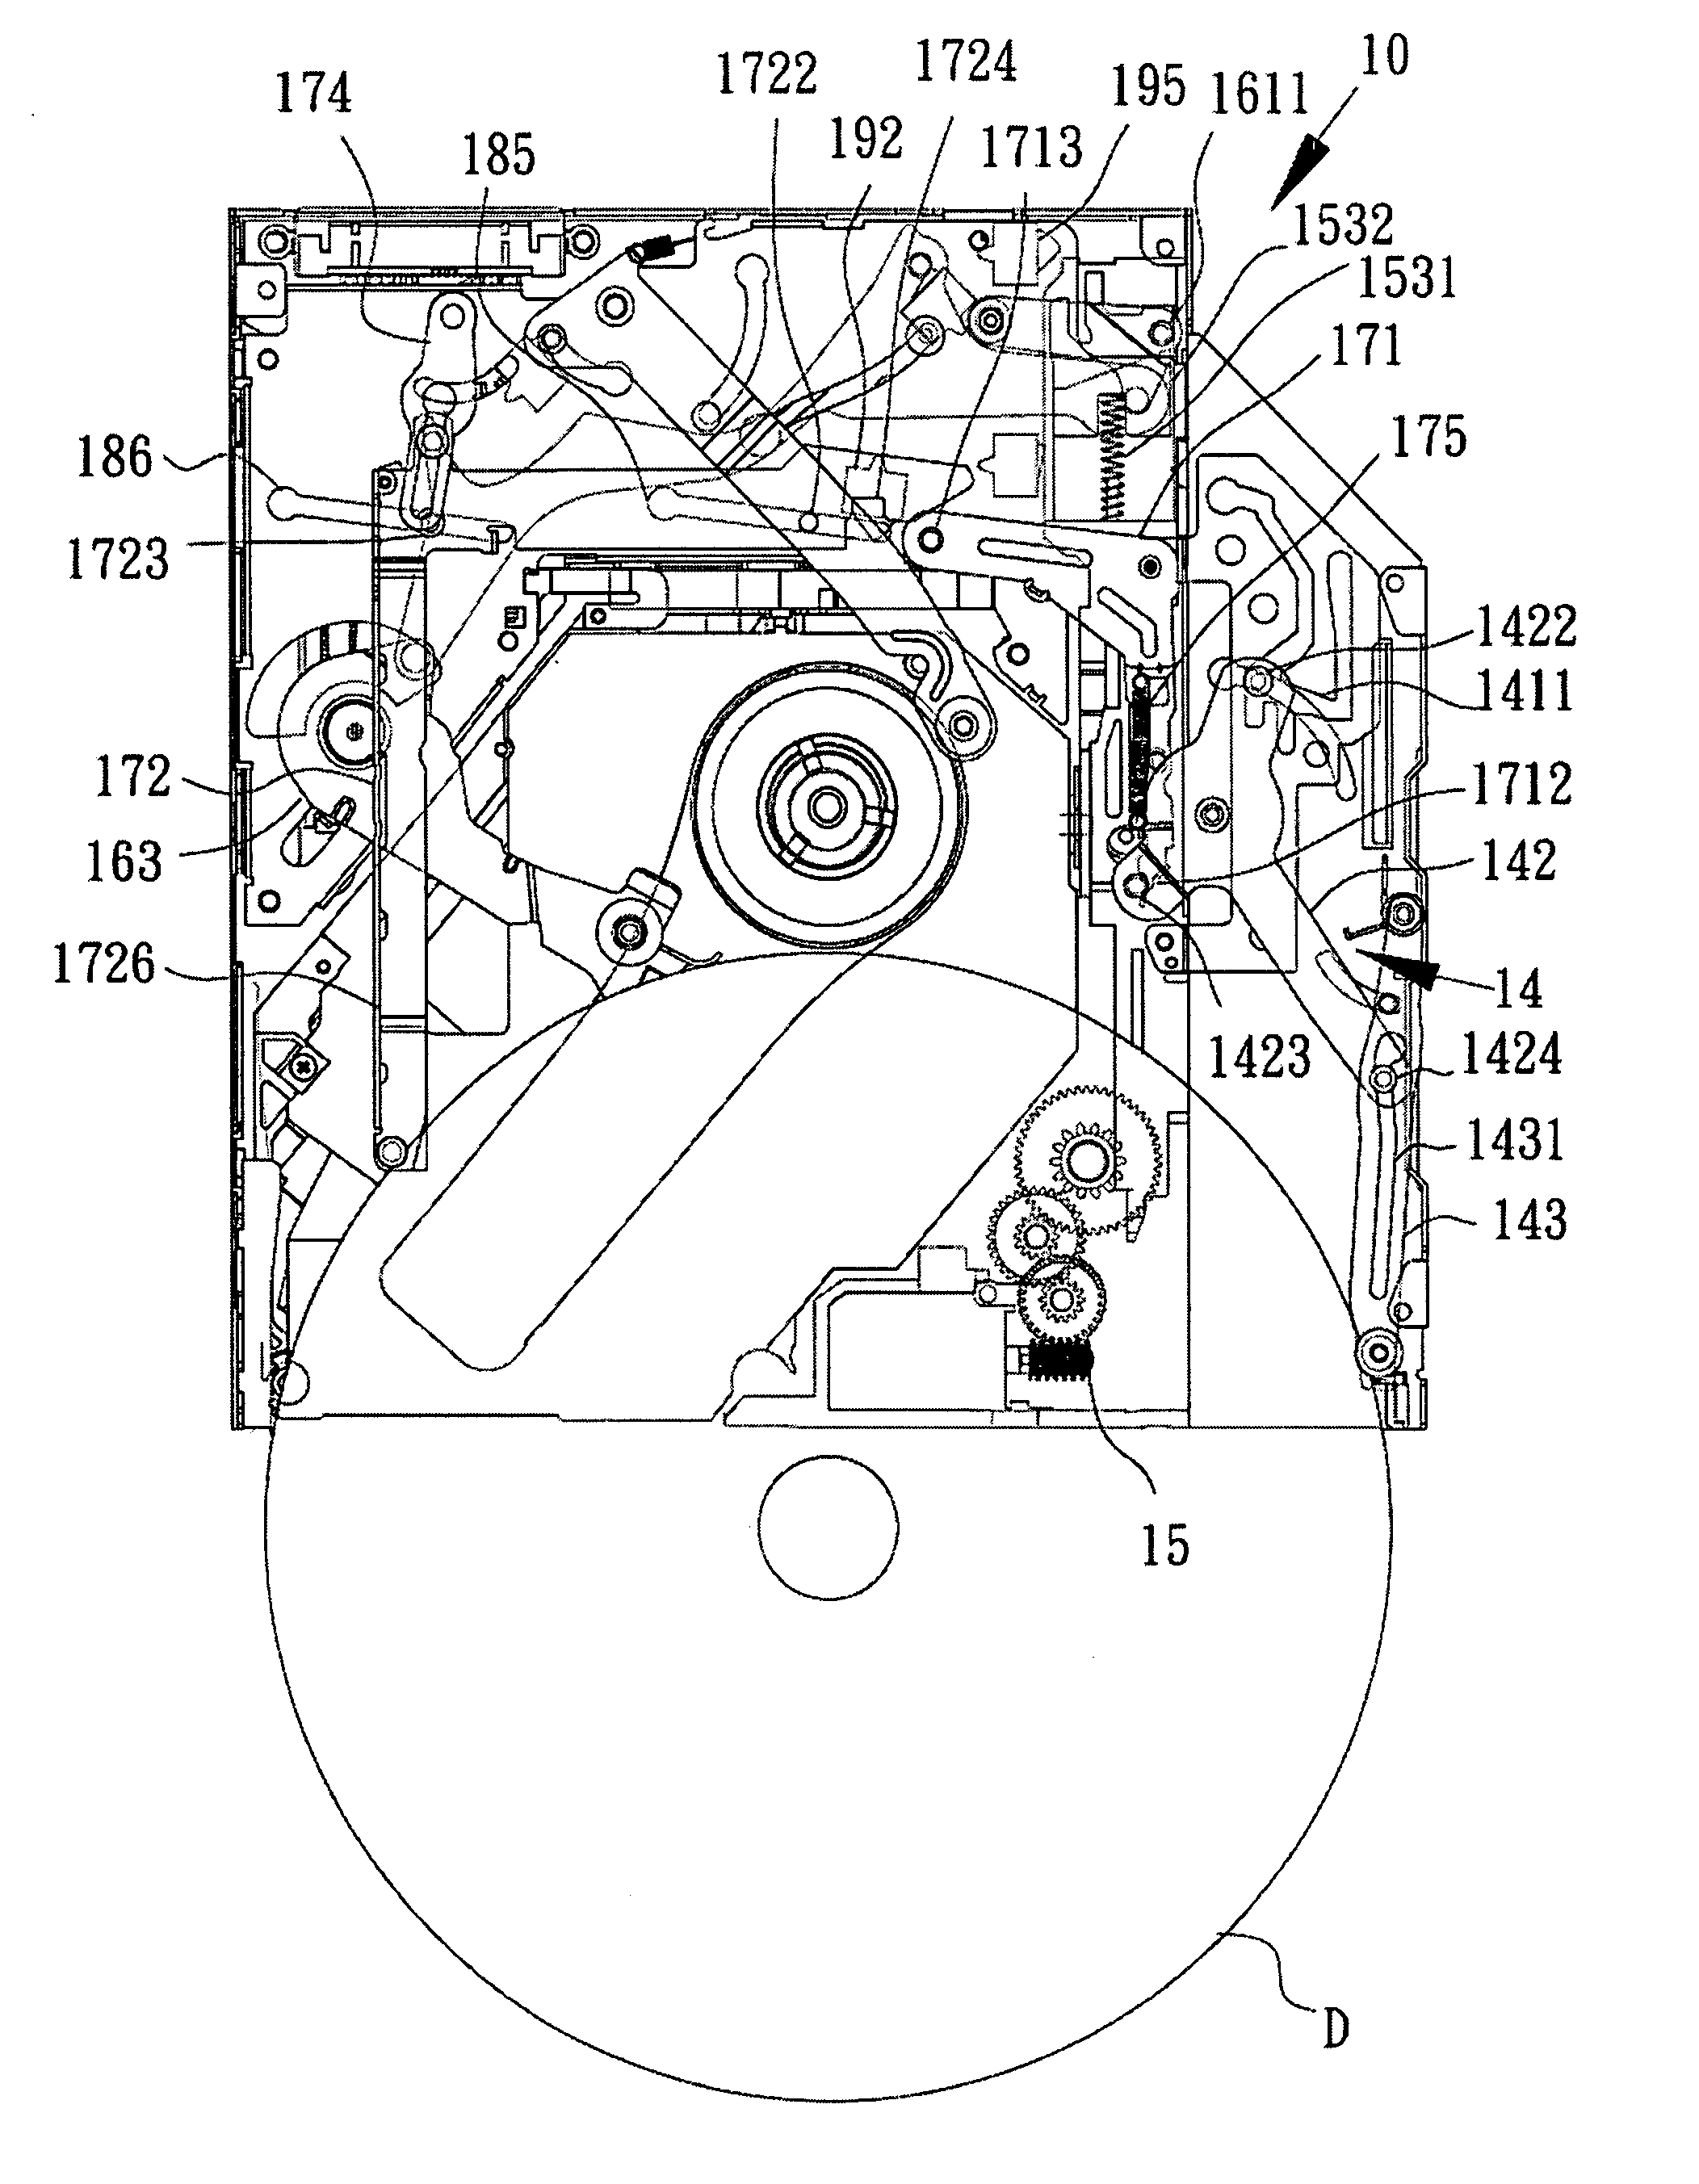 Slot-in disk drive device